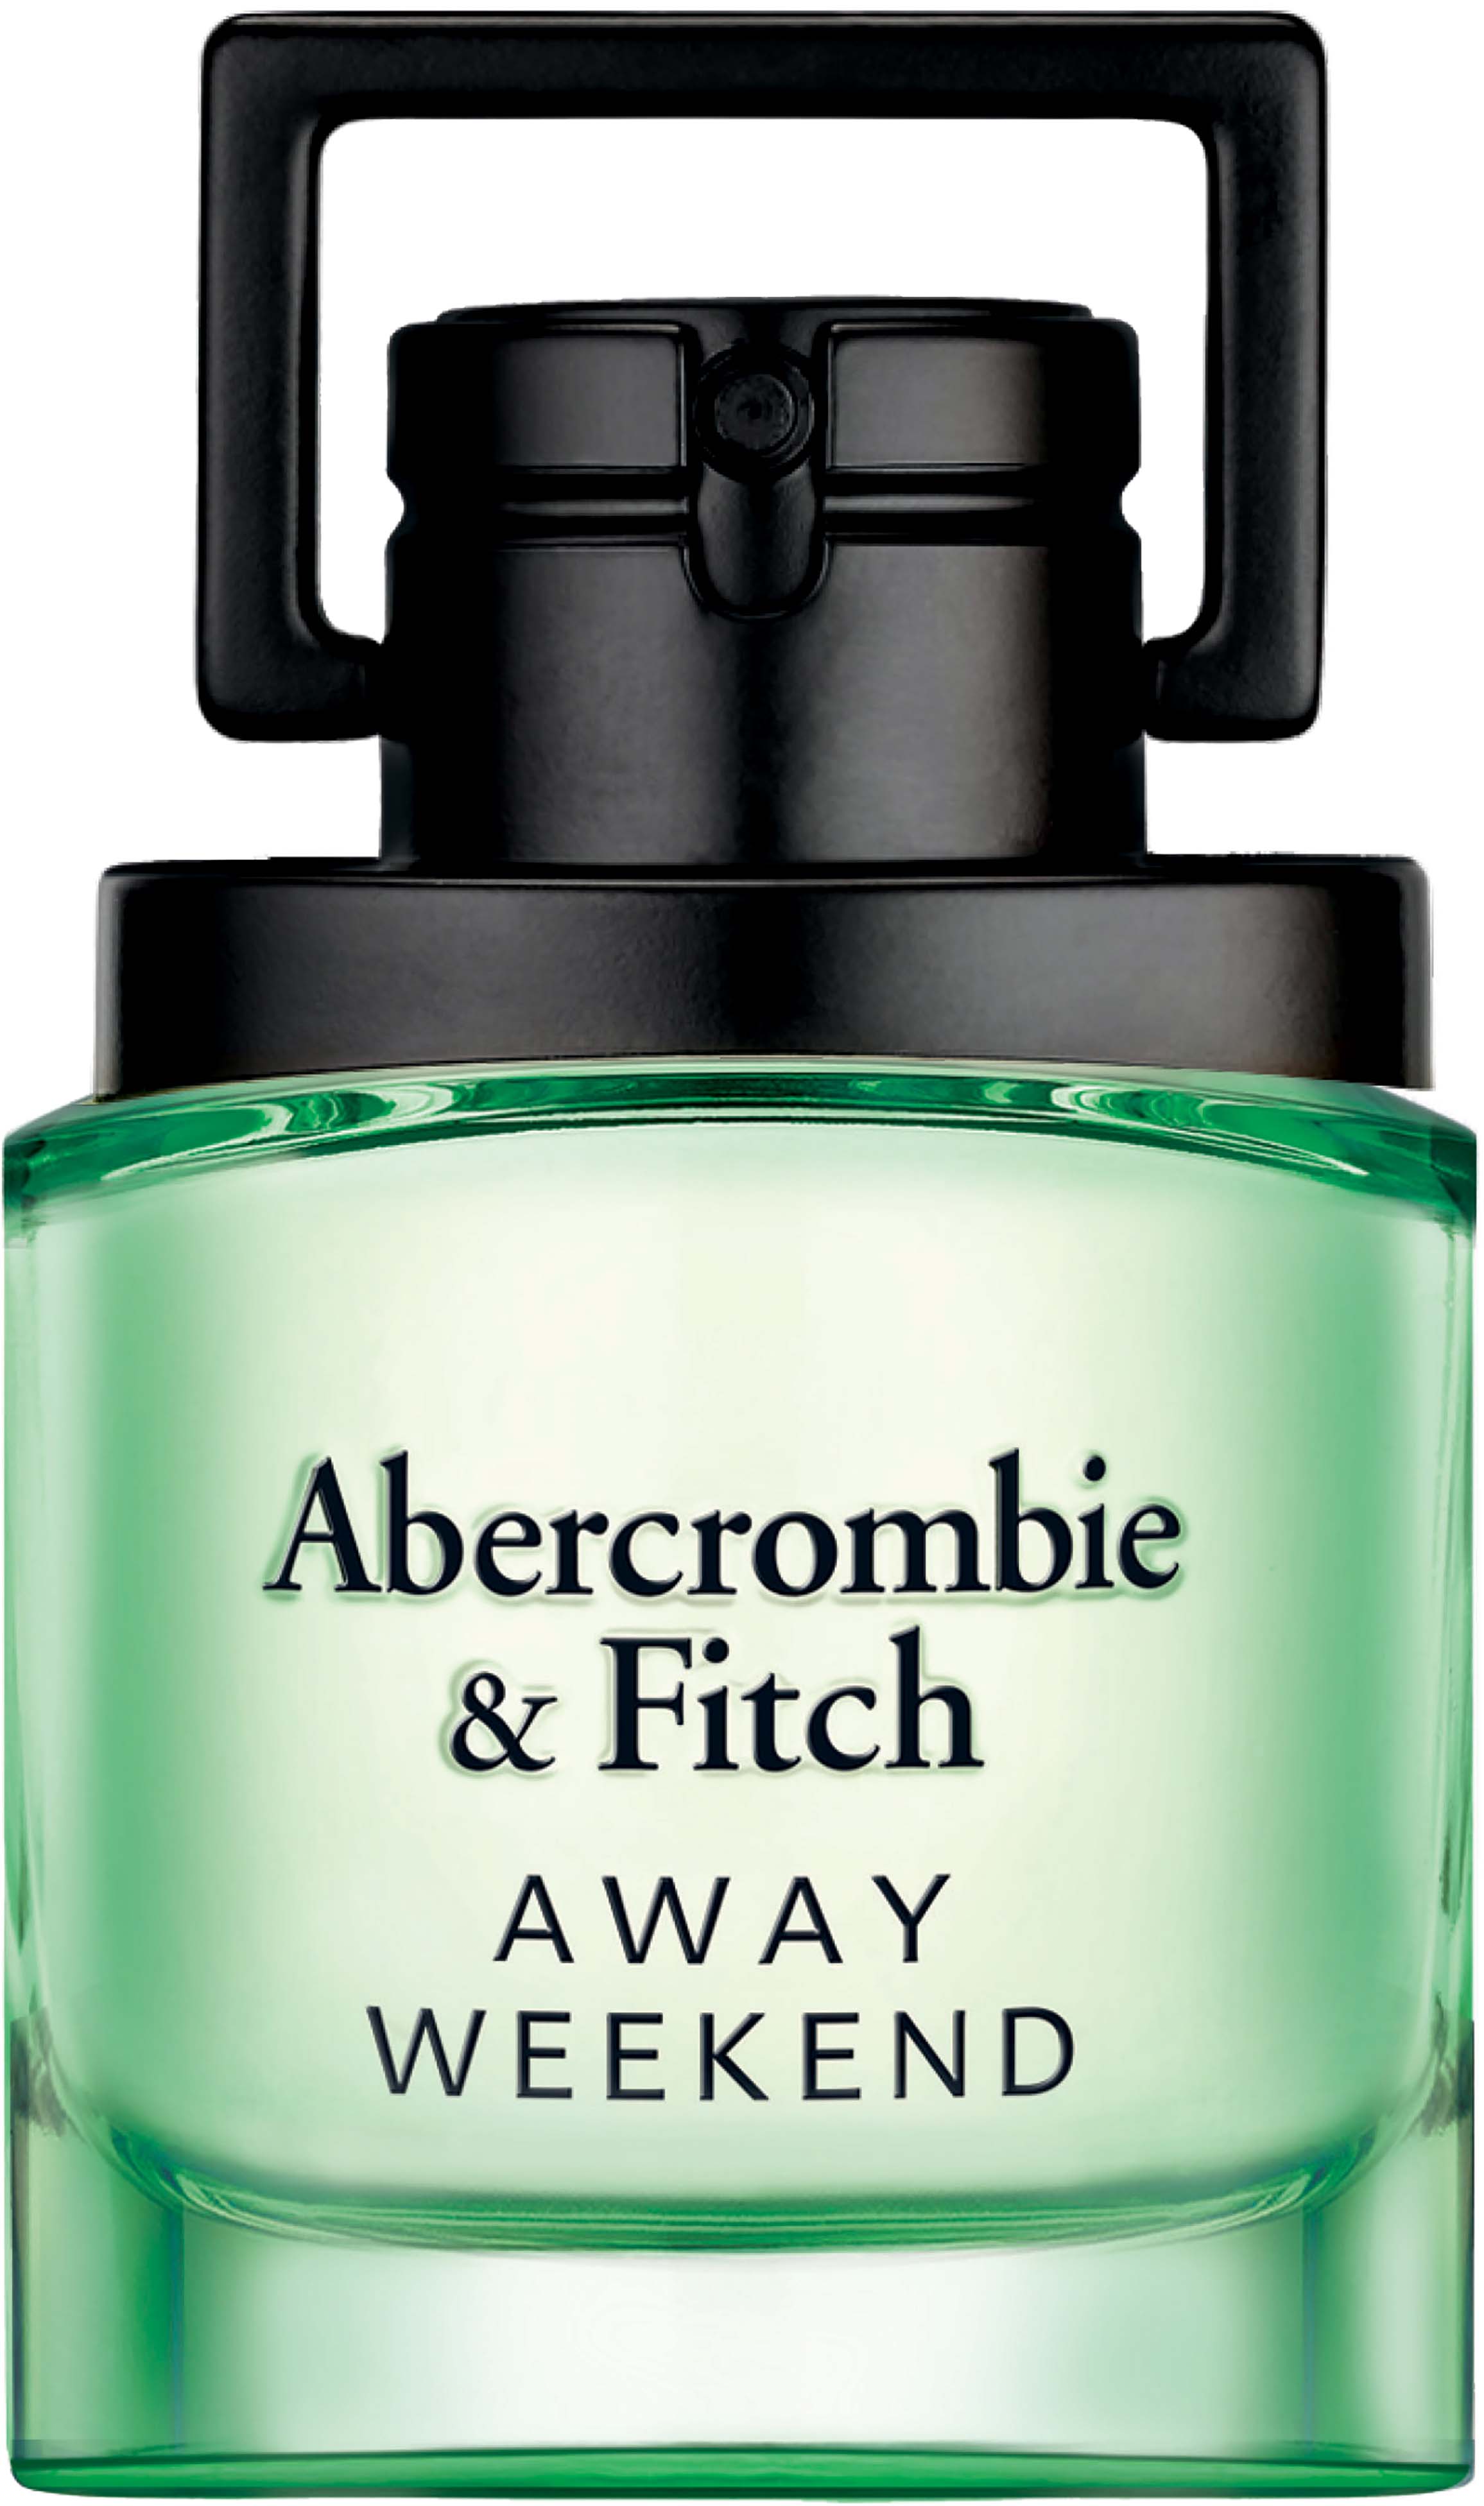 abercrombie & fitch away weekend man